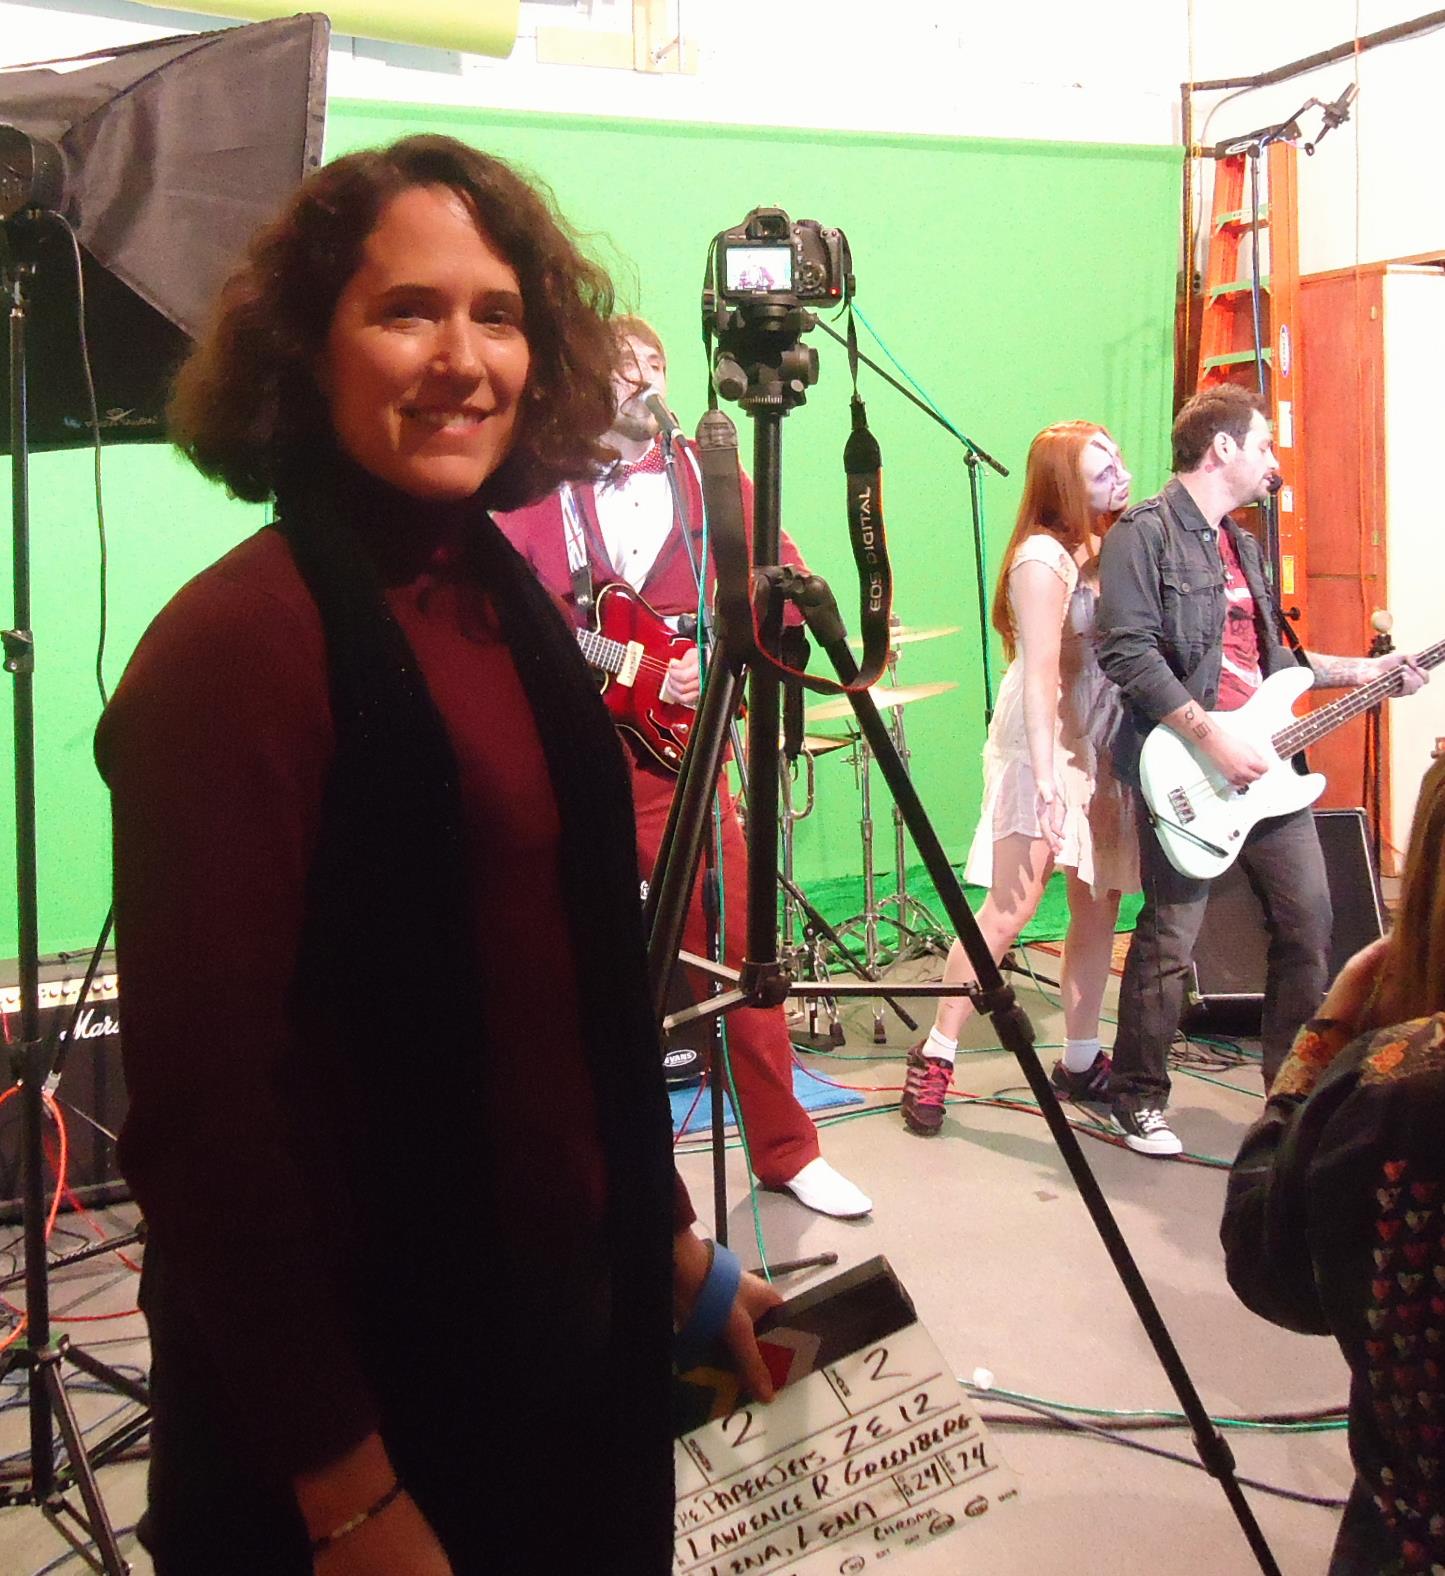 Producing video footage of the great band, The Paper Jets for 